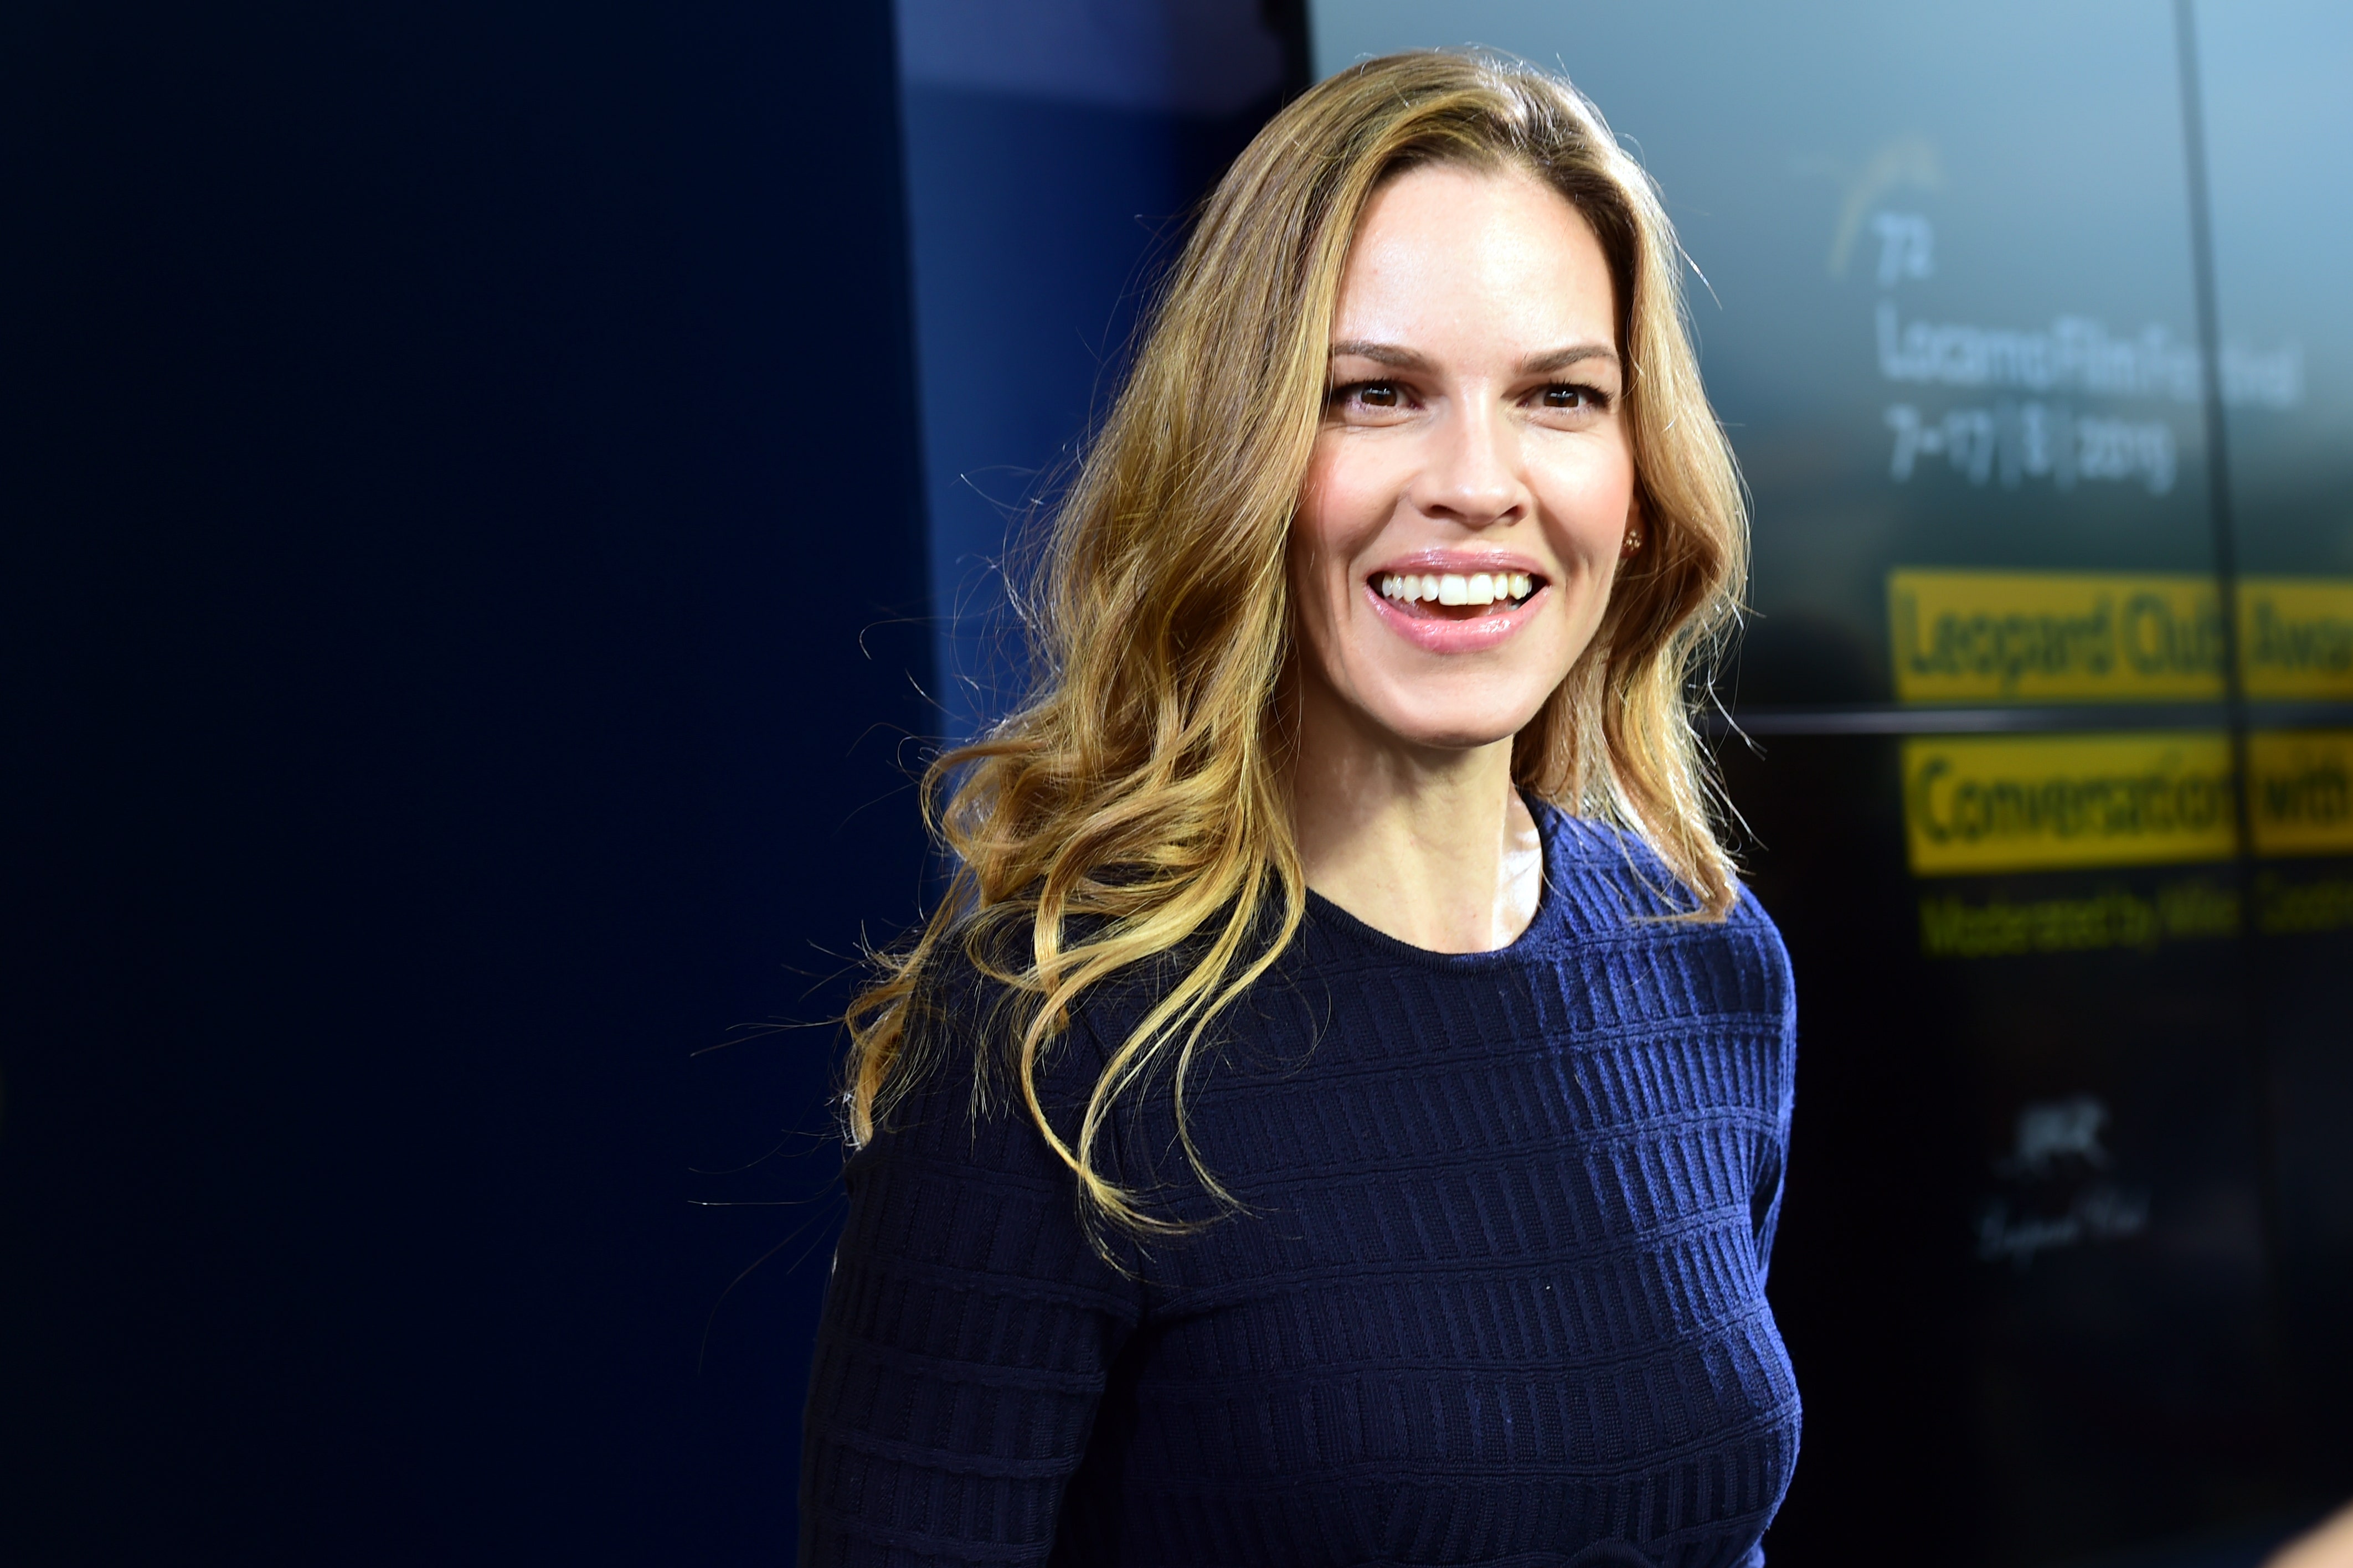 Hilary Swank reveals that her 'miracle' twins are due on her late father Stephen's birthday